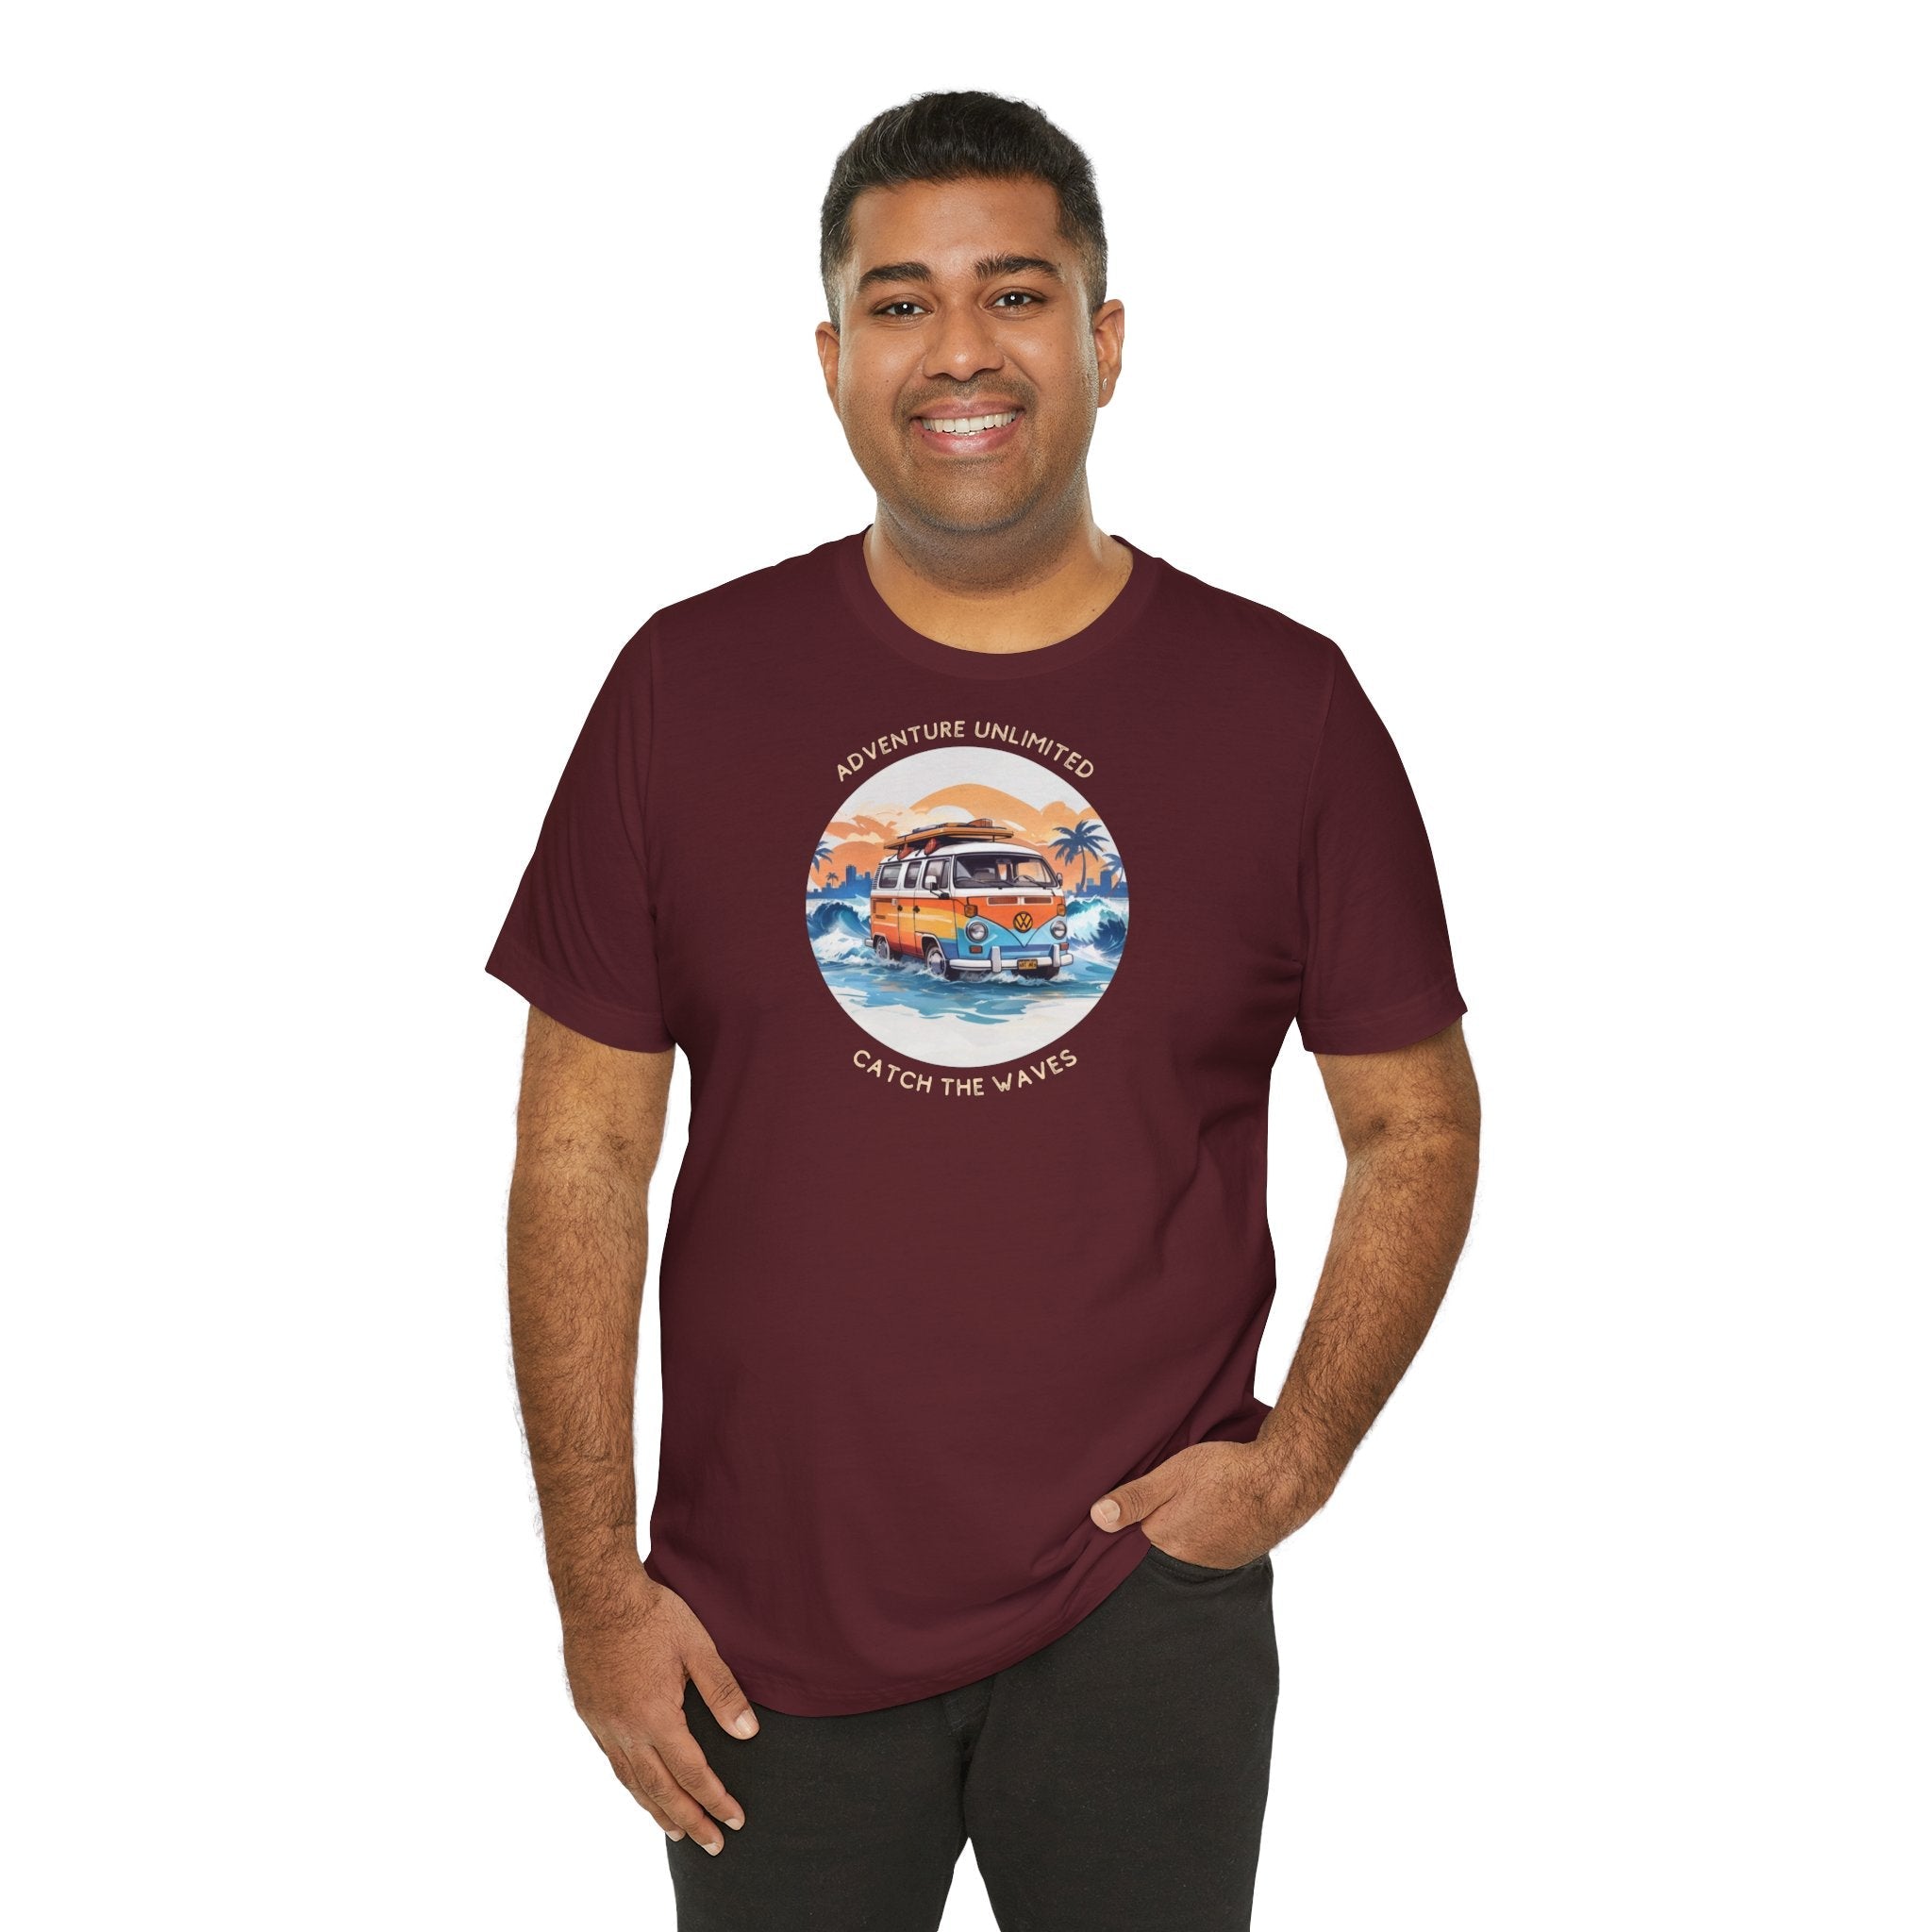 Printed maroon t-shirt featuring ’Adventure Unlimited’ design